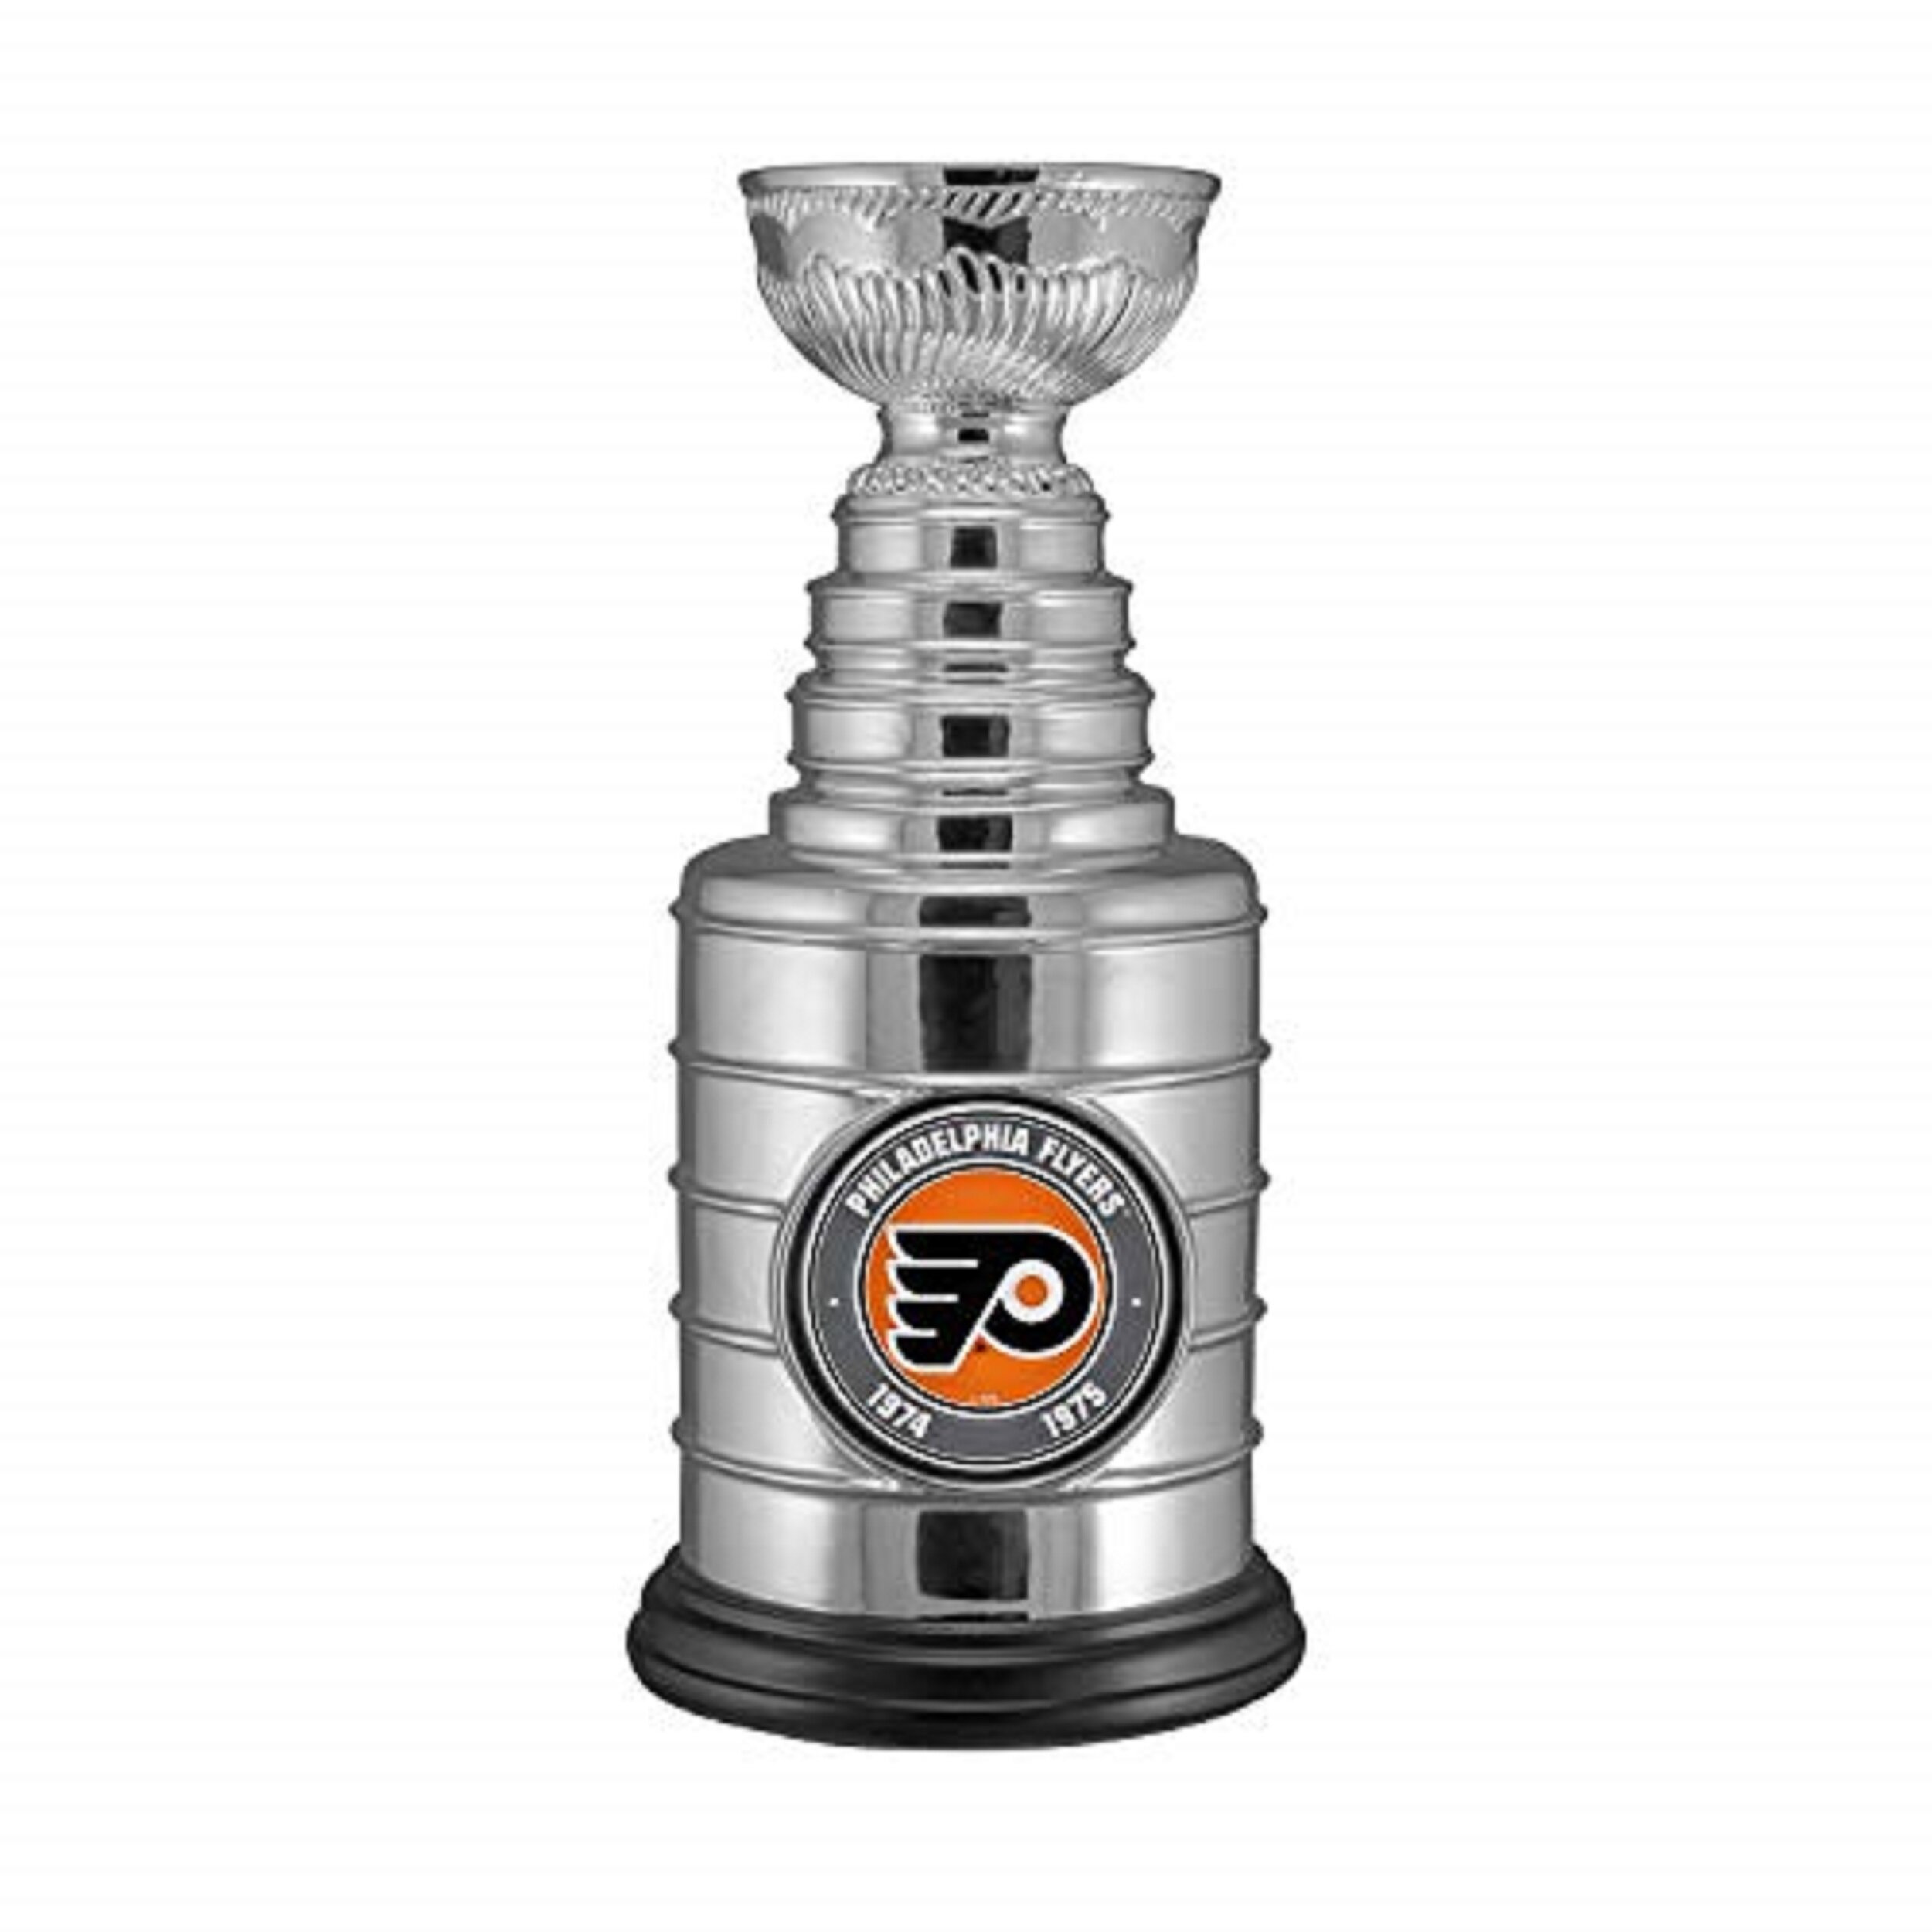 The Sports Vault Corp. NHL Stanley Cup Champions Trophy Replica